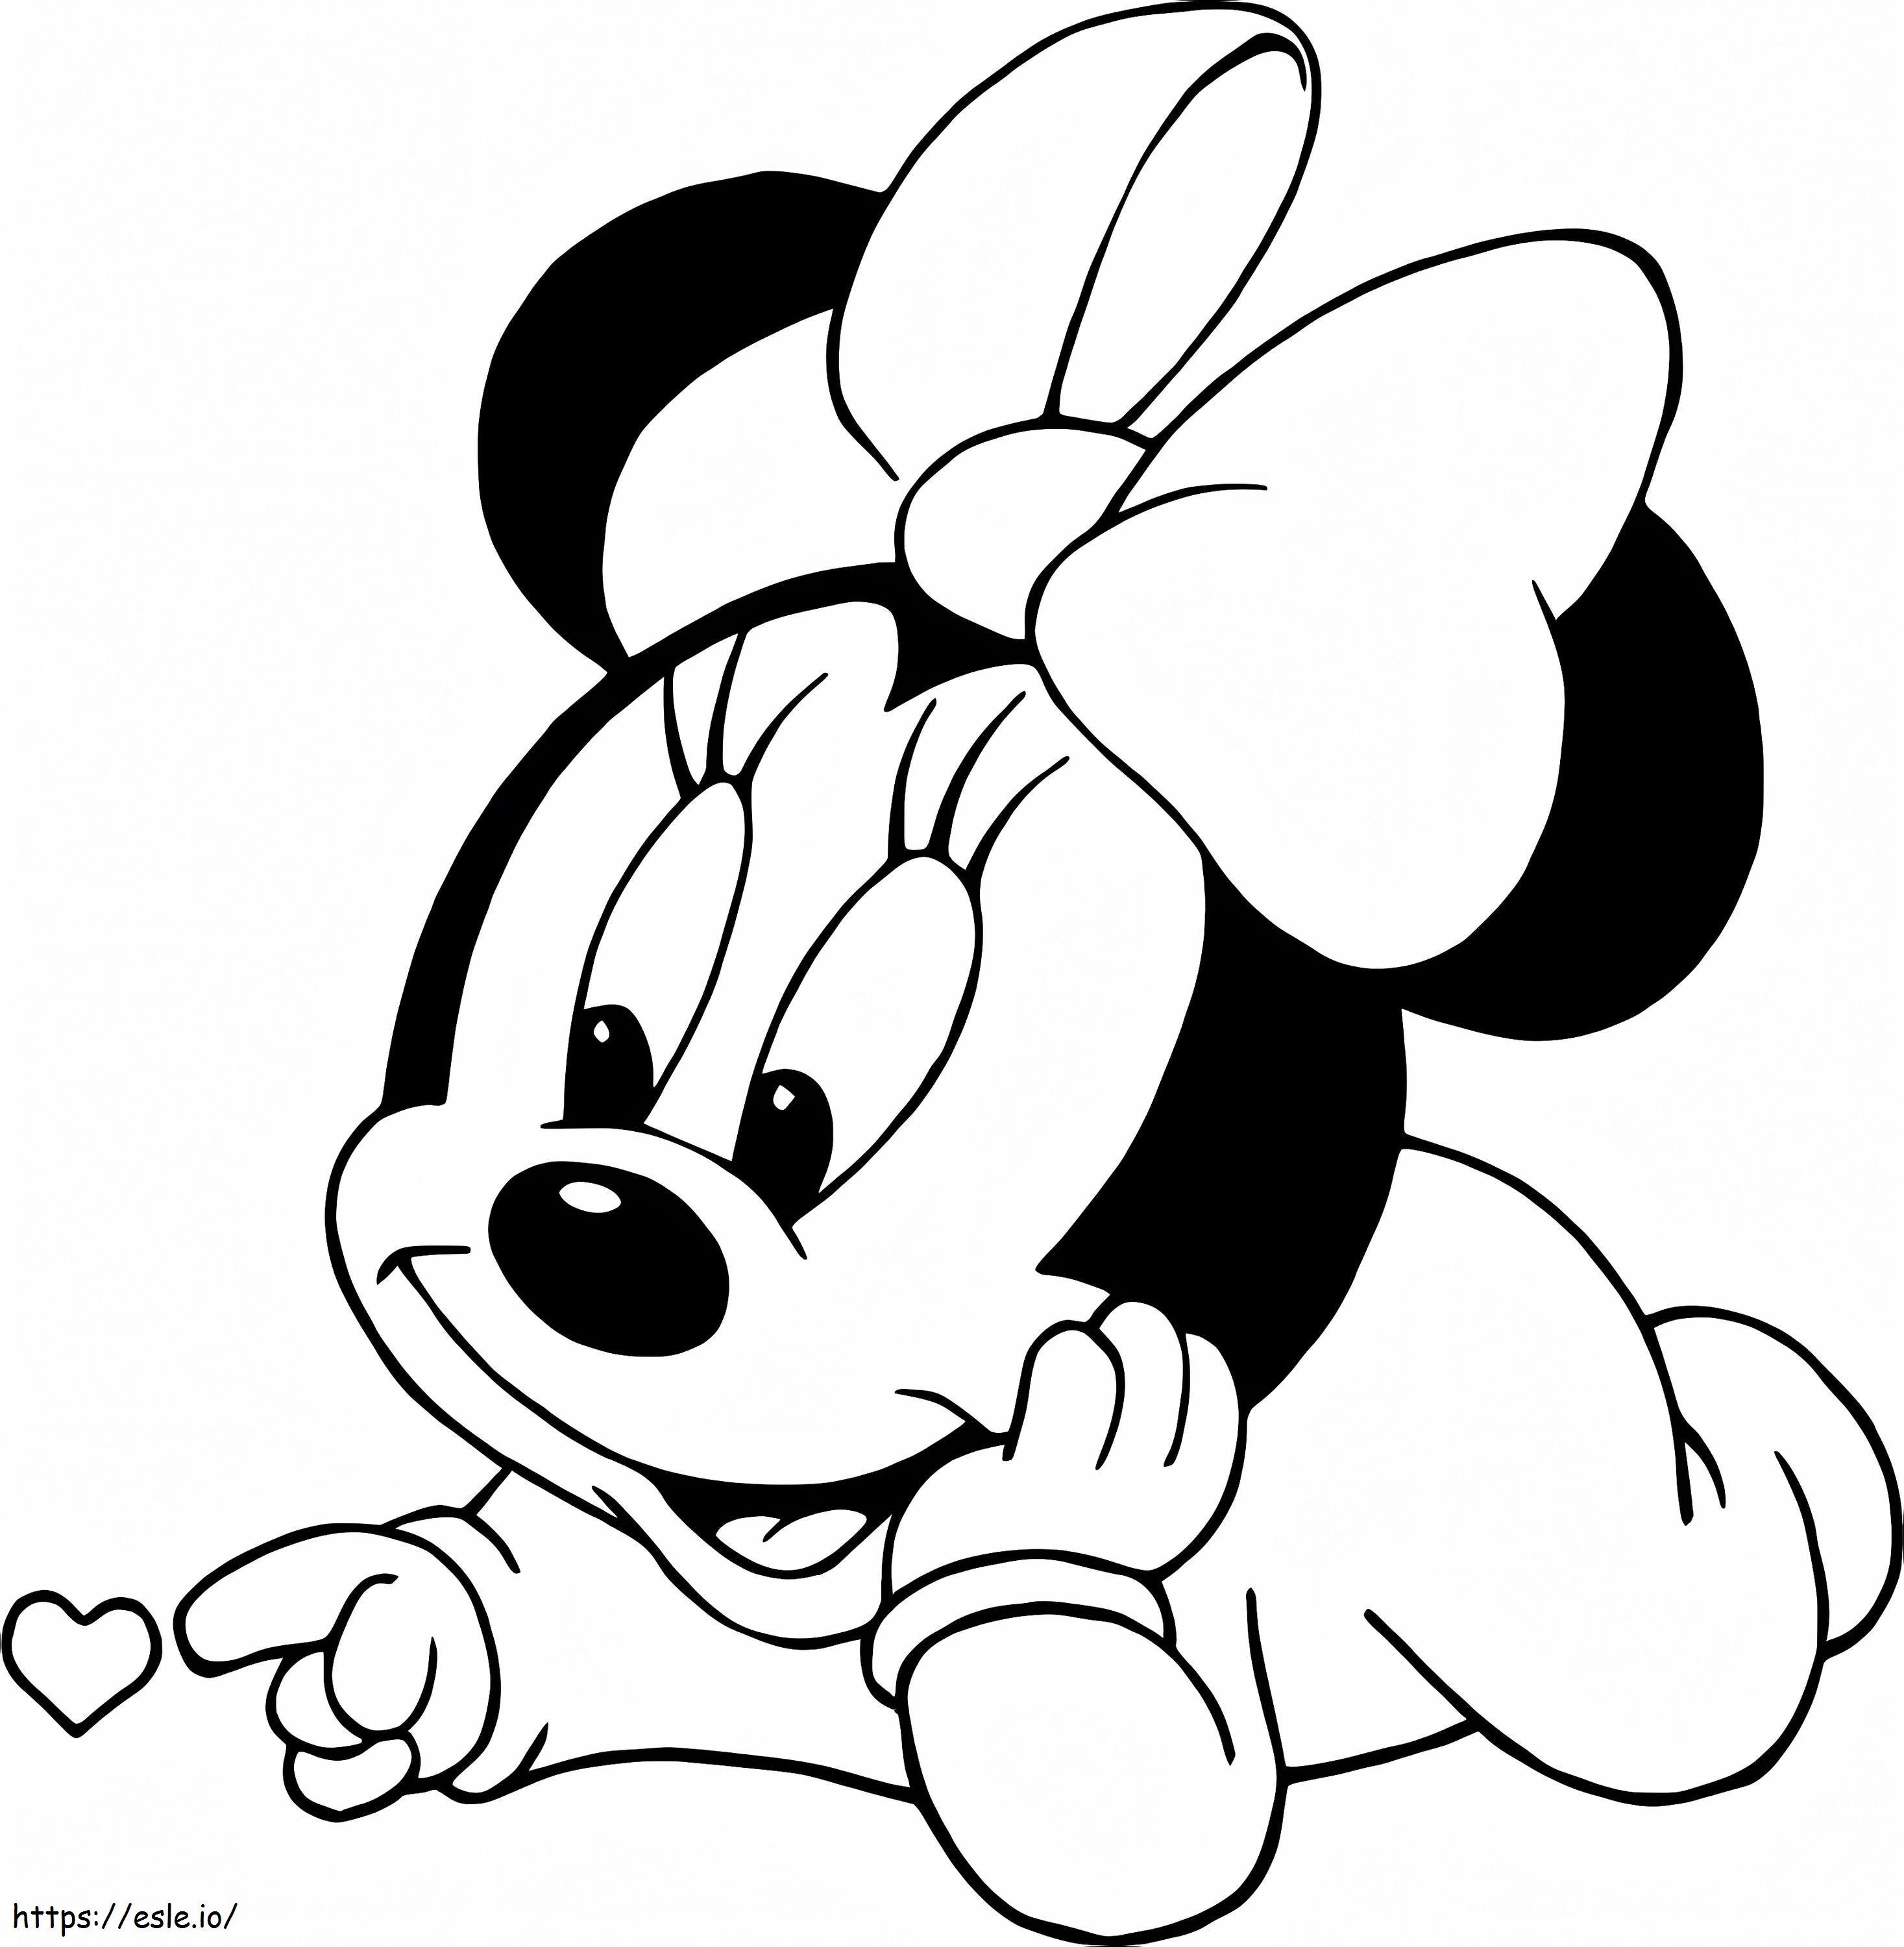 Bebe Minnie Mouse coloring page